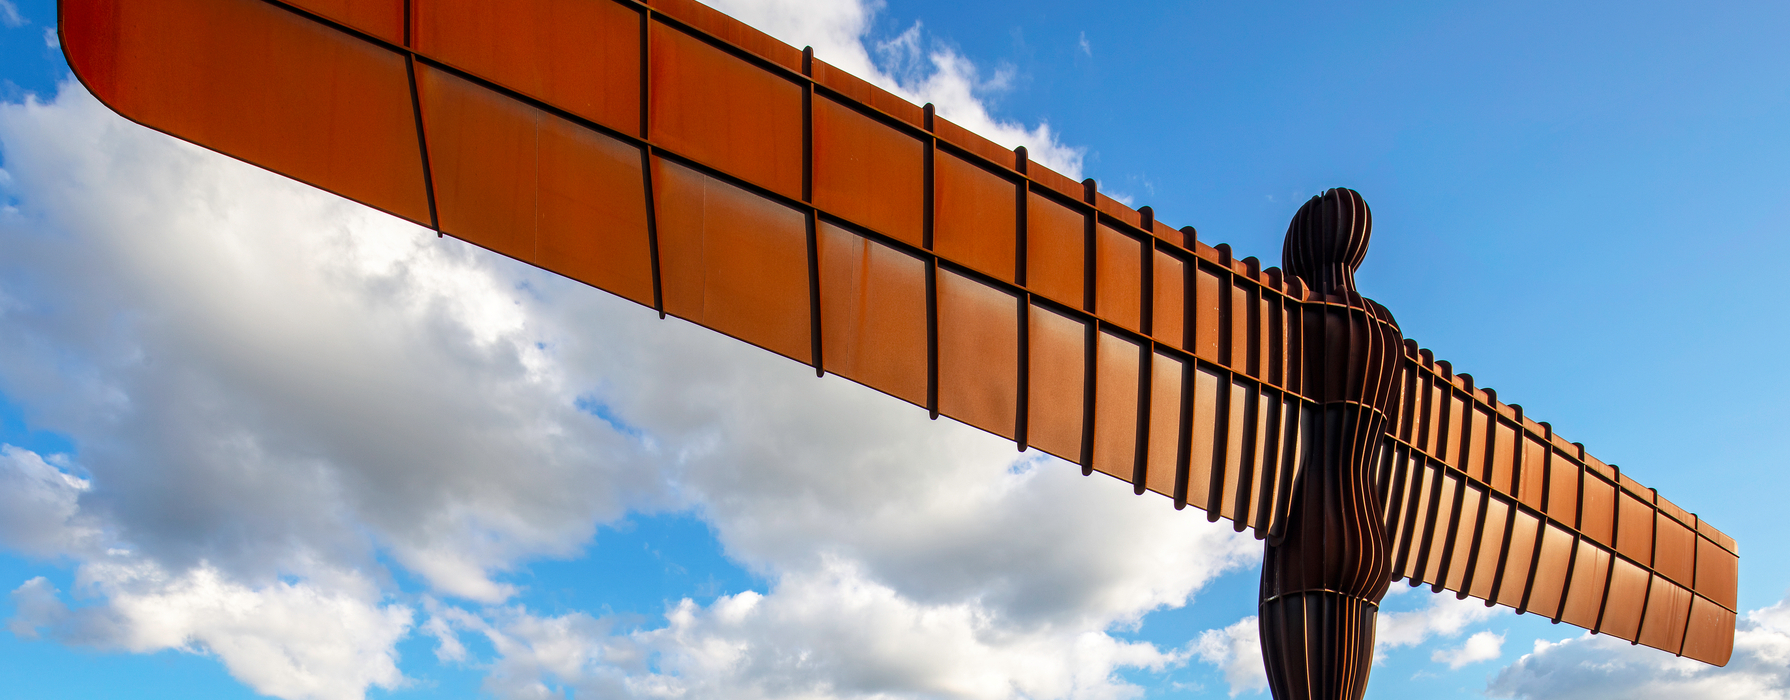 Angel of the North with blue sky